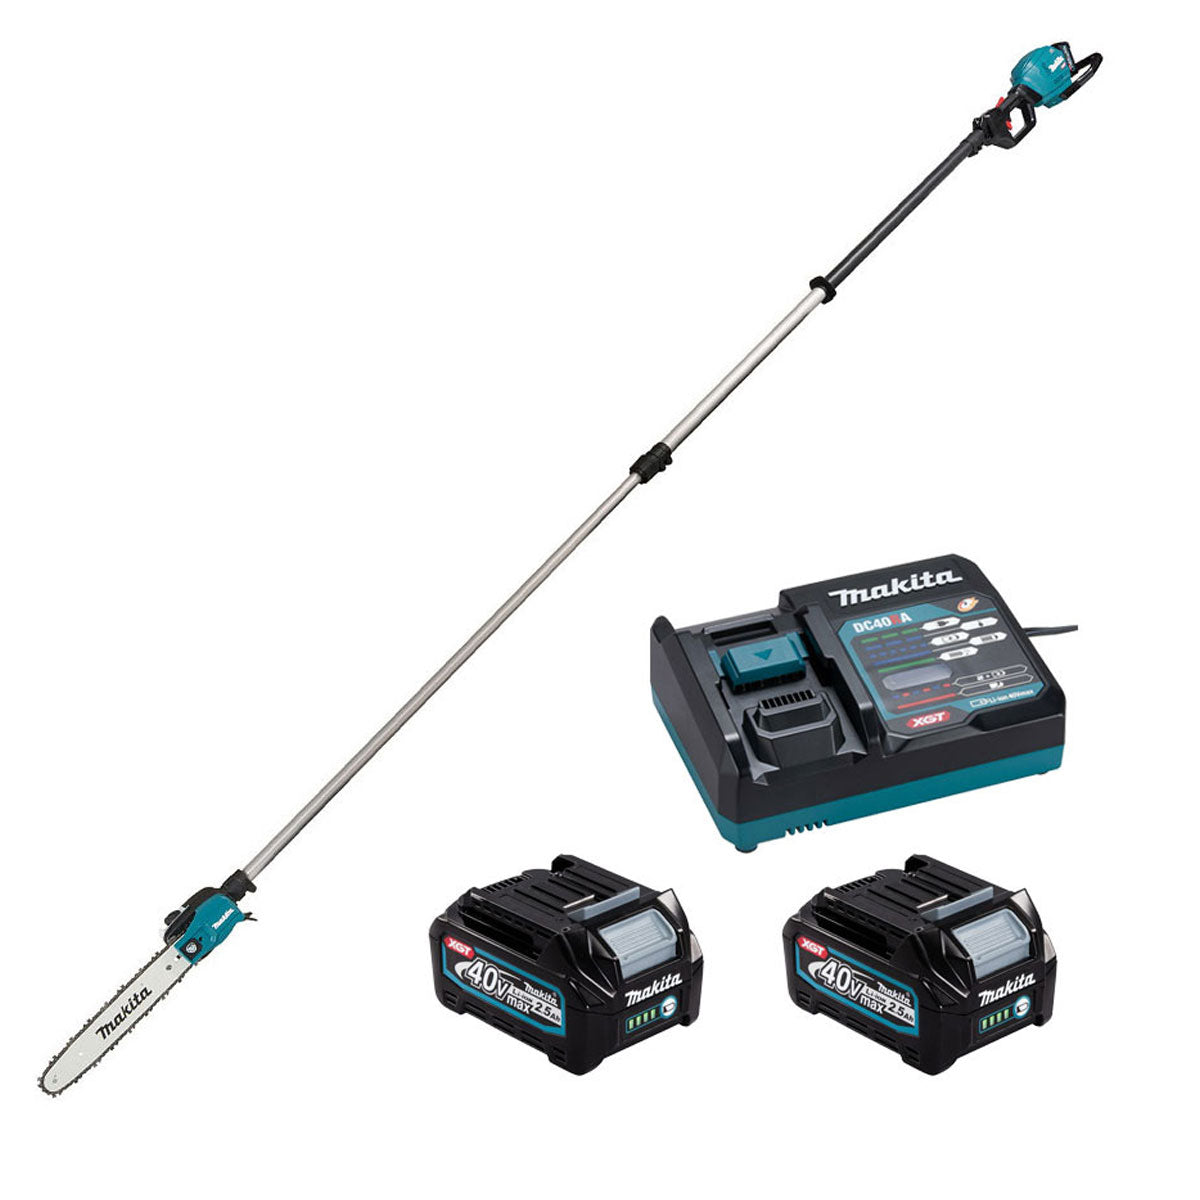 Makita UA004GD203 40V XGT Brushless Telescopic Pole Saw with 2 x 2.5Ah Battery and Charger